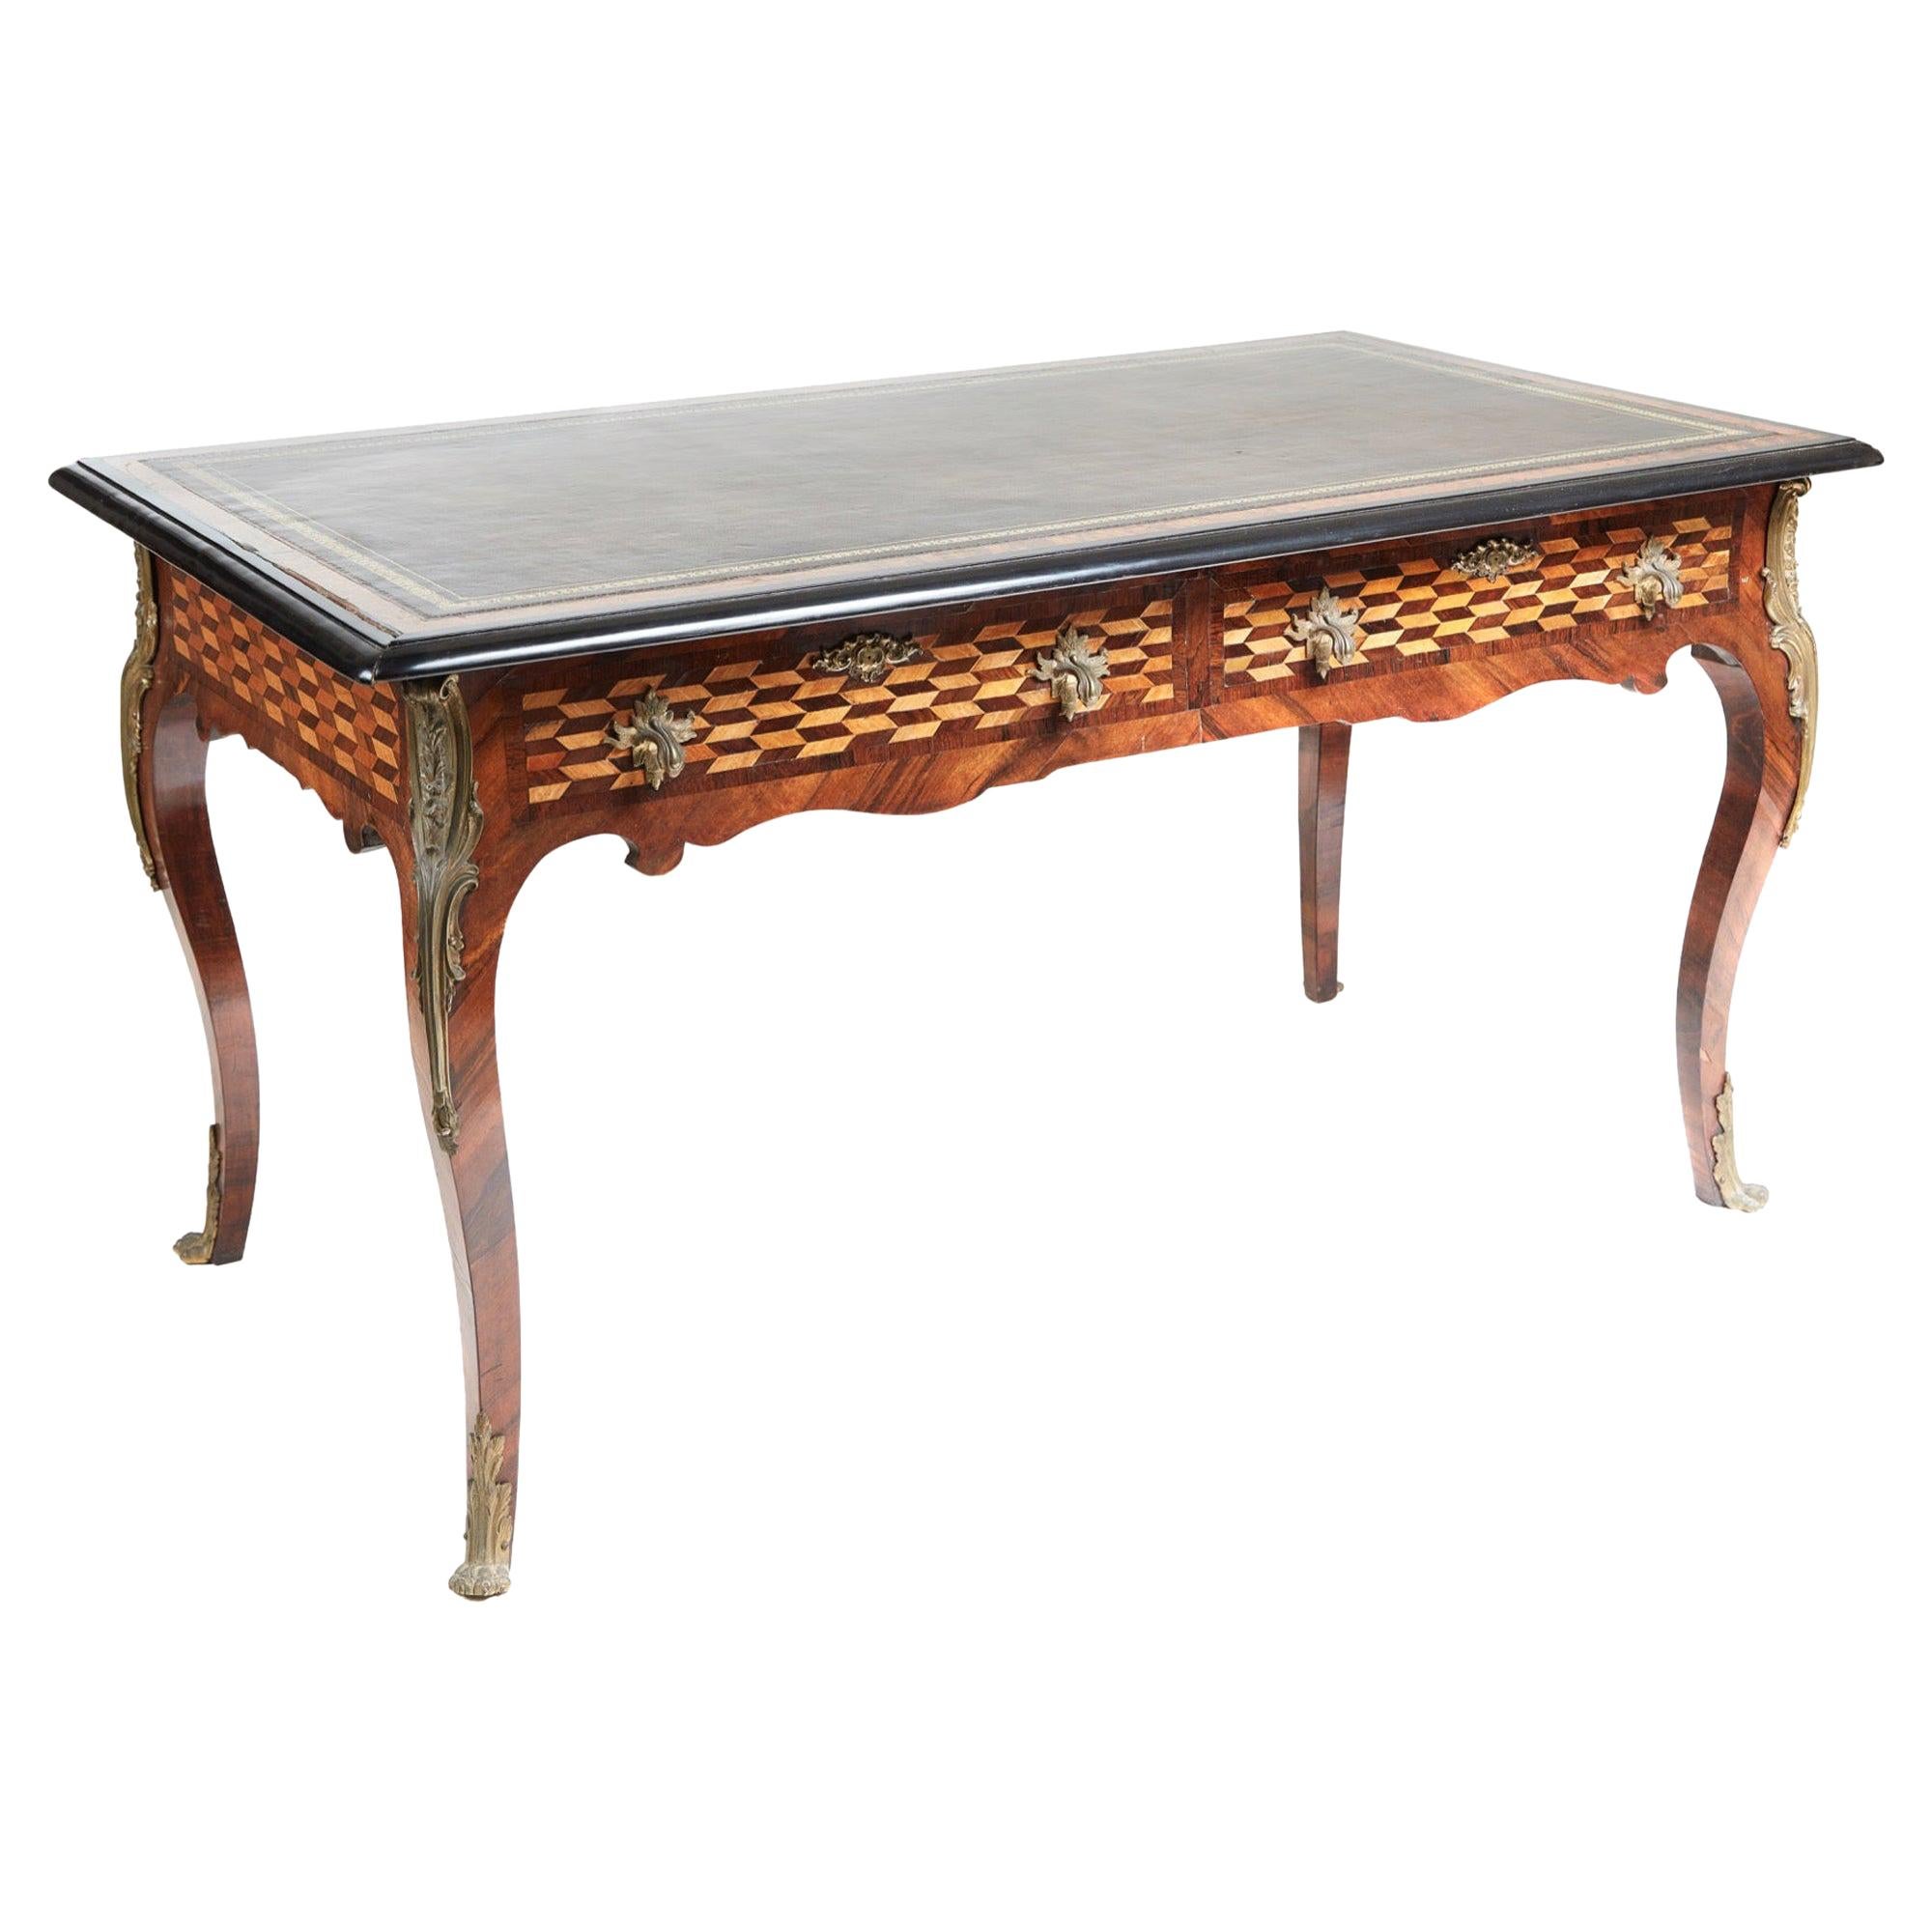 Fine French 19th Century Victorian Parquetry and Ormolu-Mounted Bureau Plat Desk